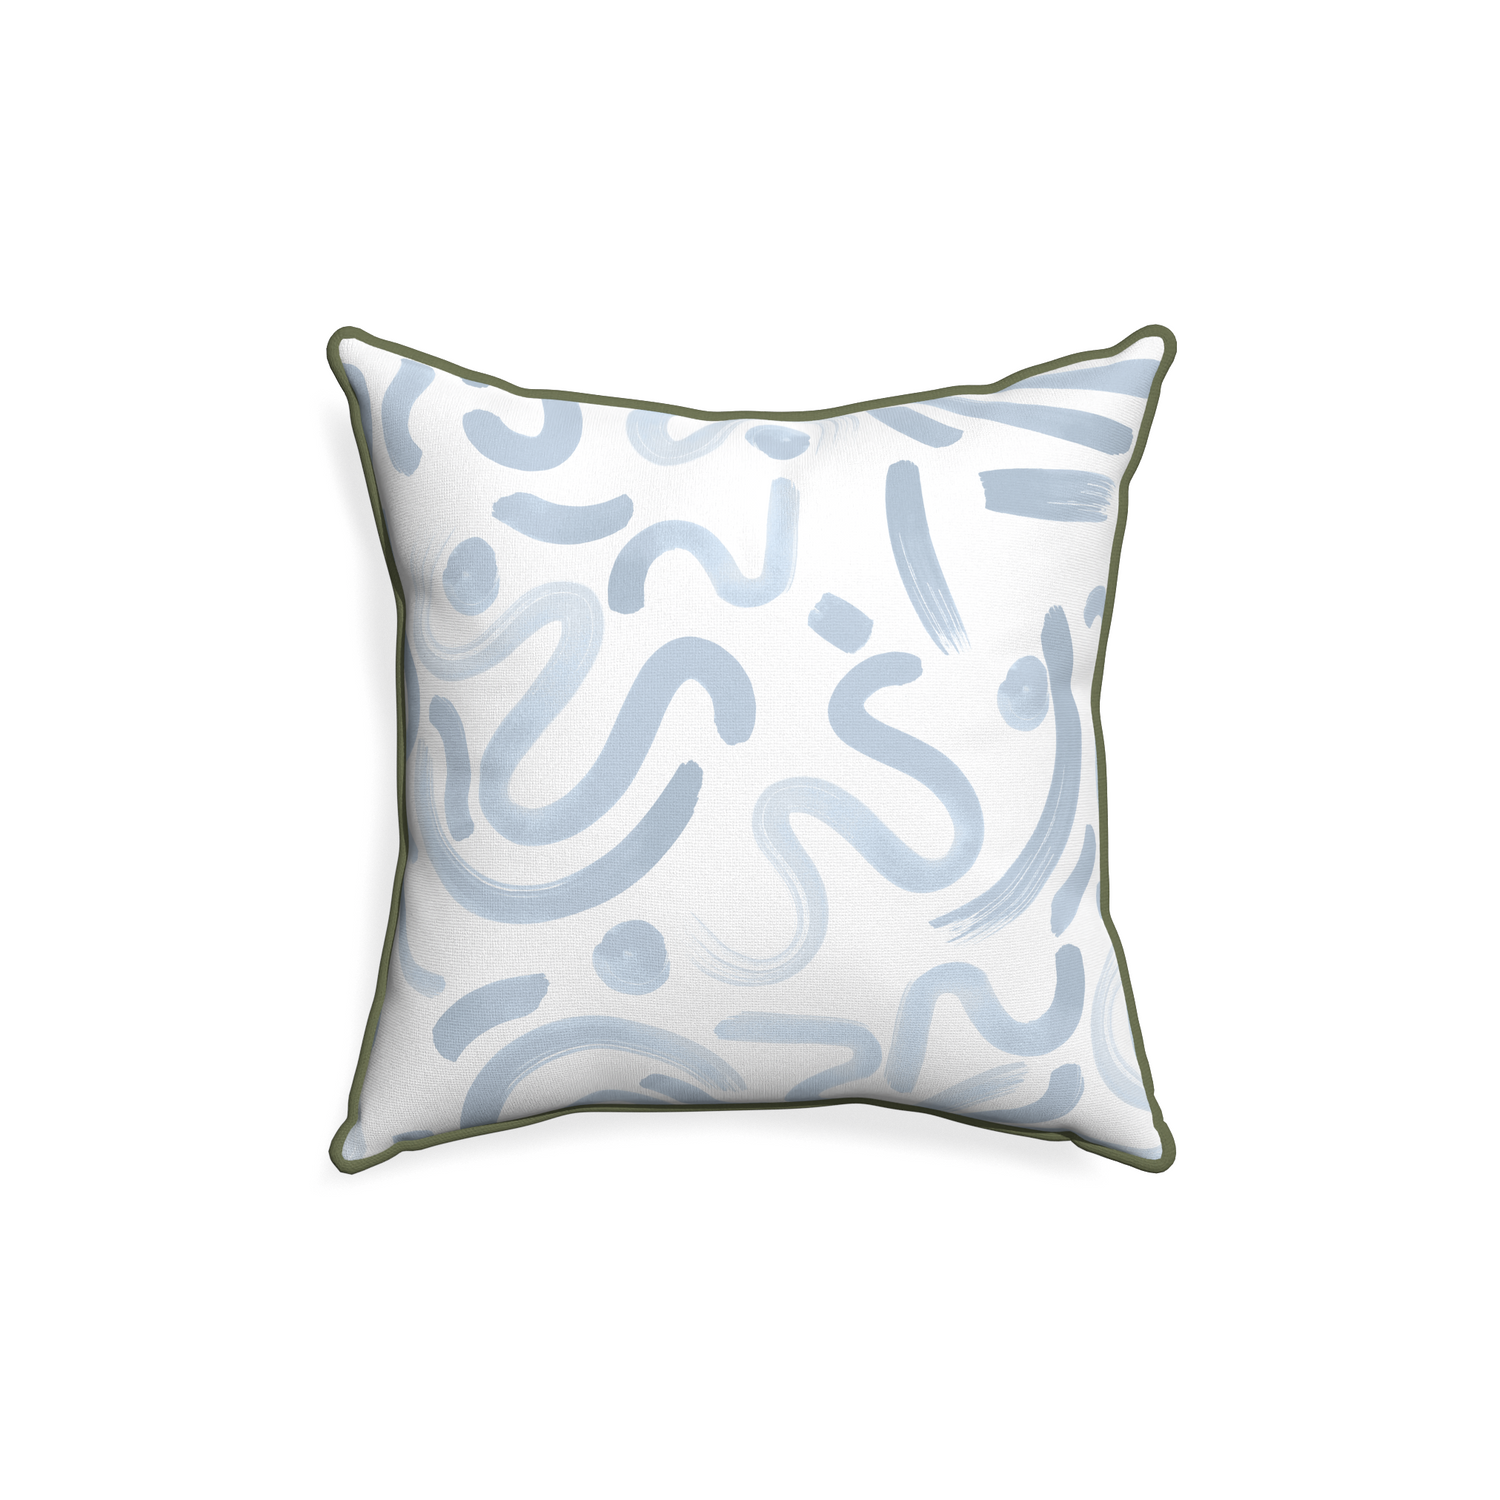 18-square hockney sky custom pillow with f piping on white background